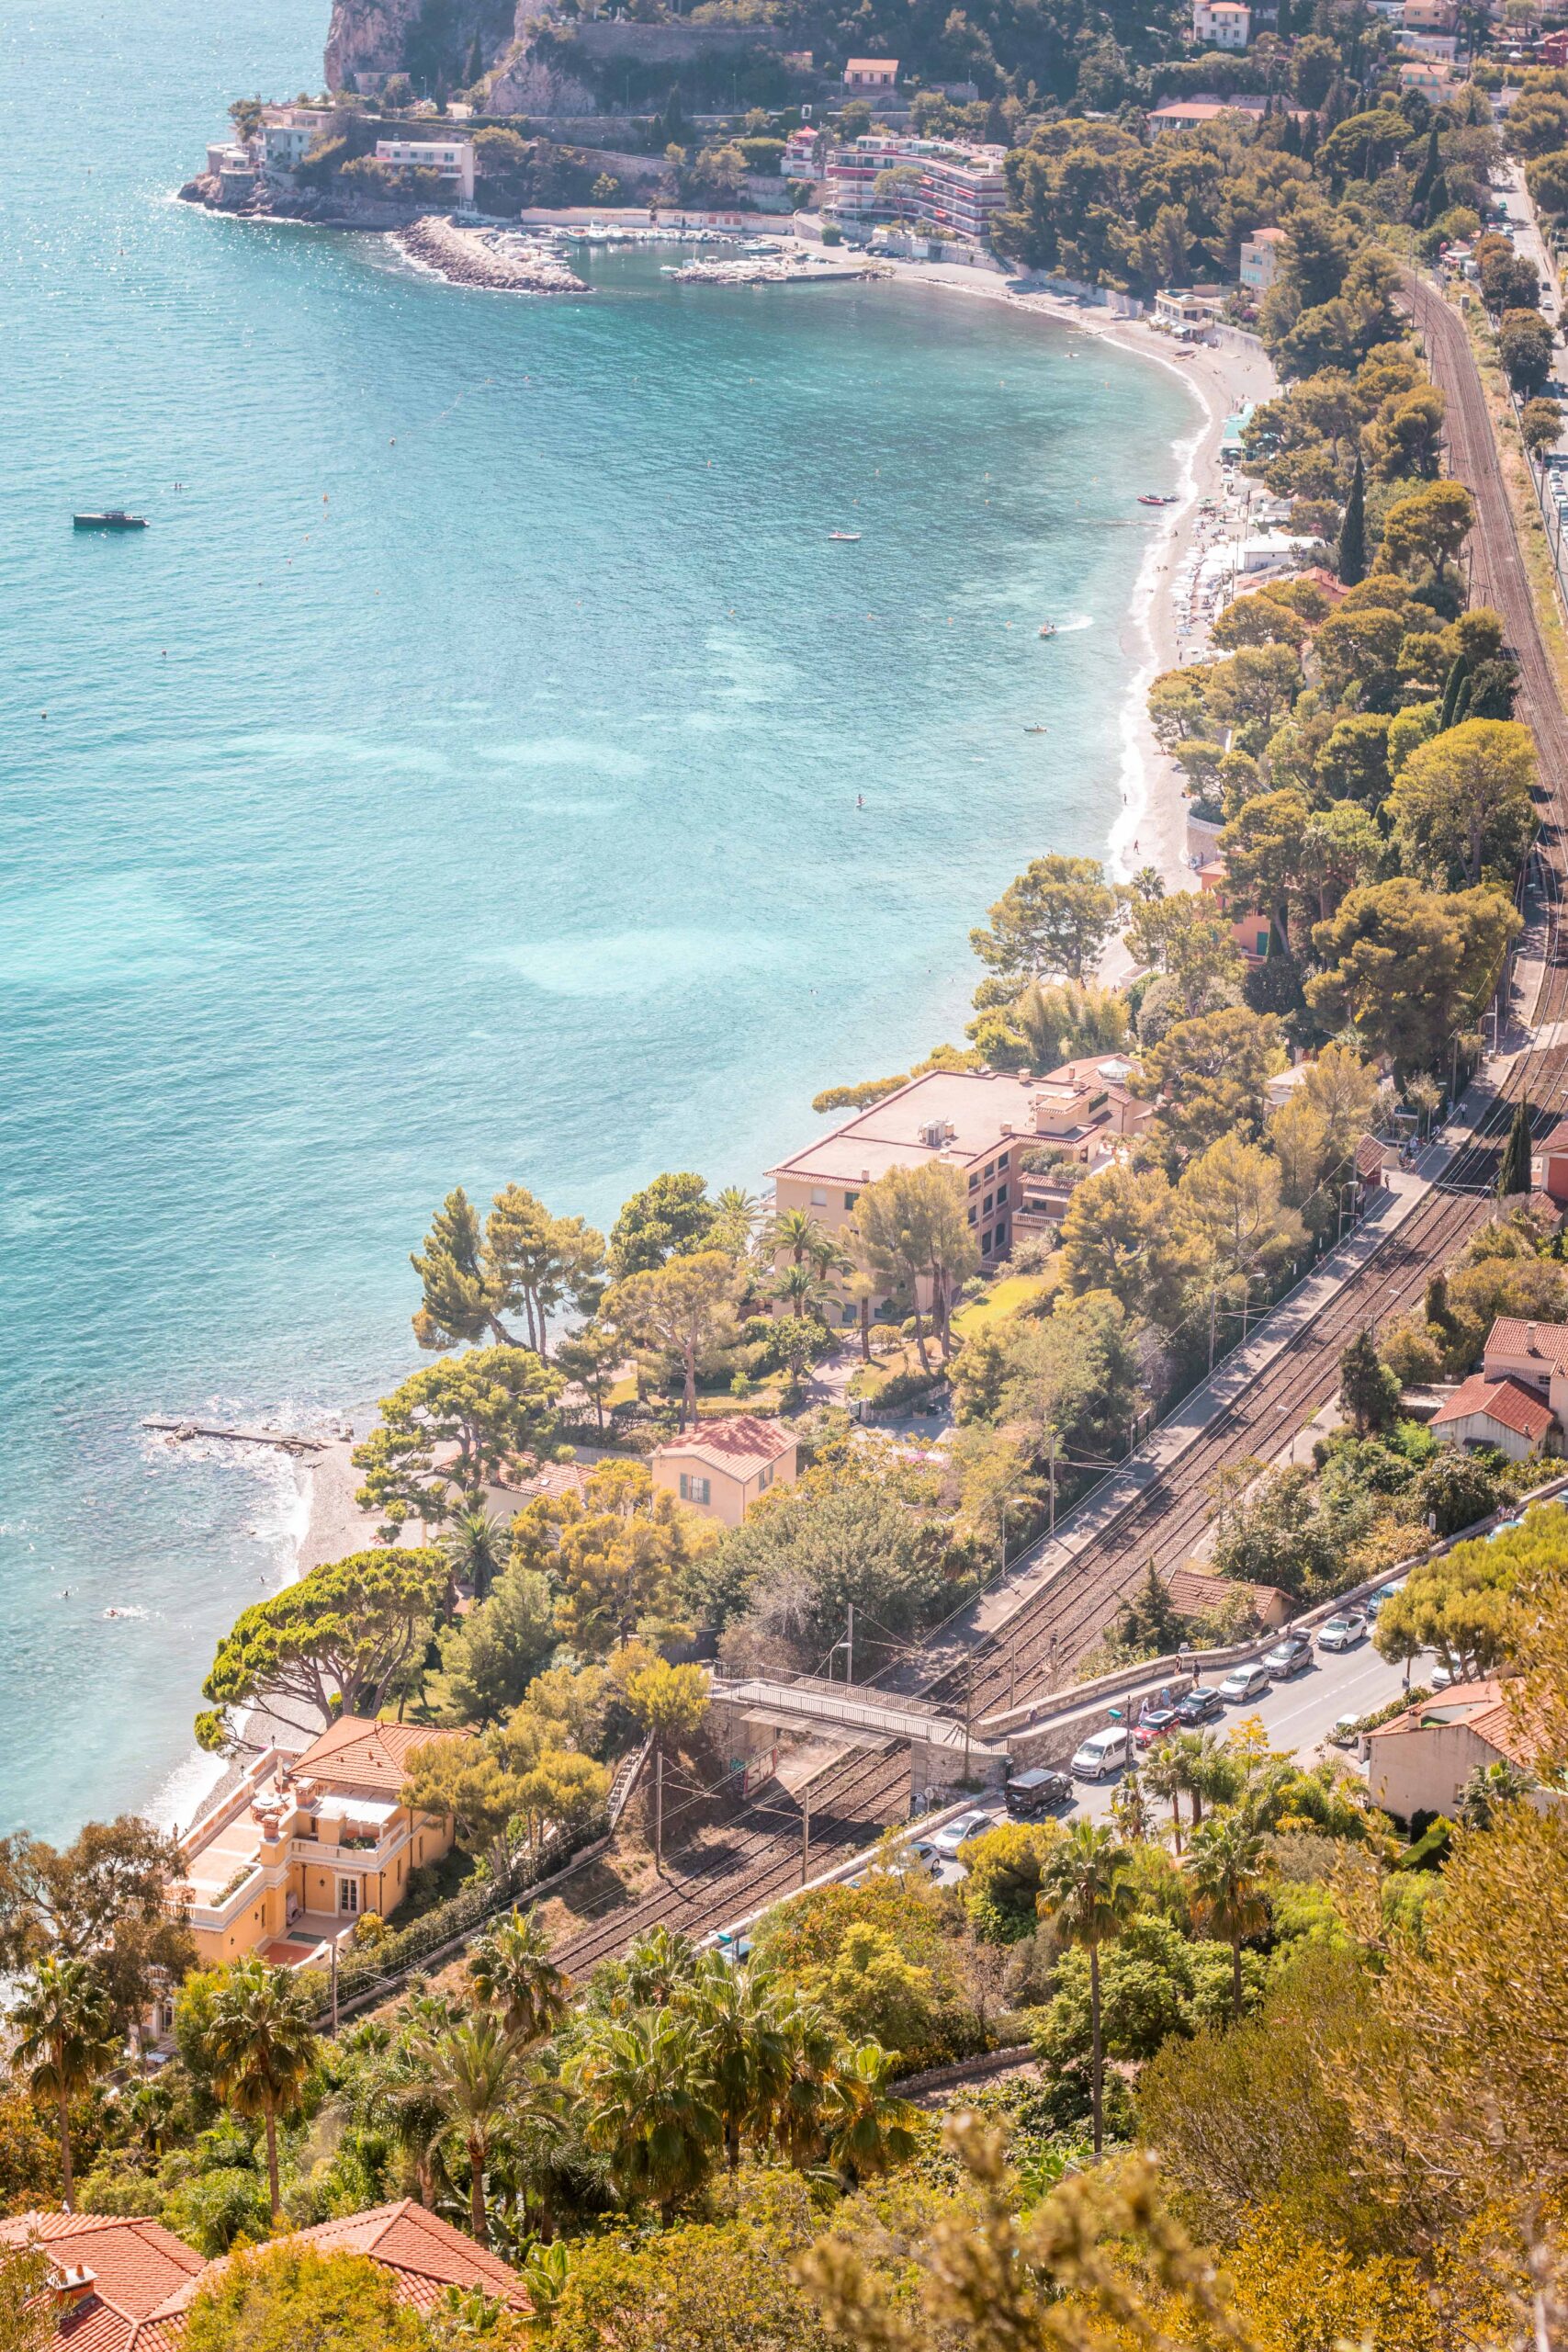 Above view of the beach, the sea and railway as seen from the Sentier de Nietzche hike in Eze, France